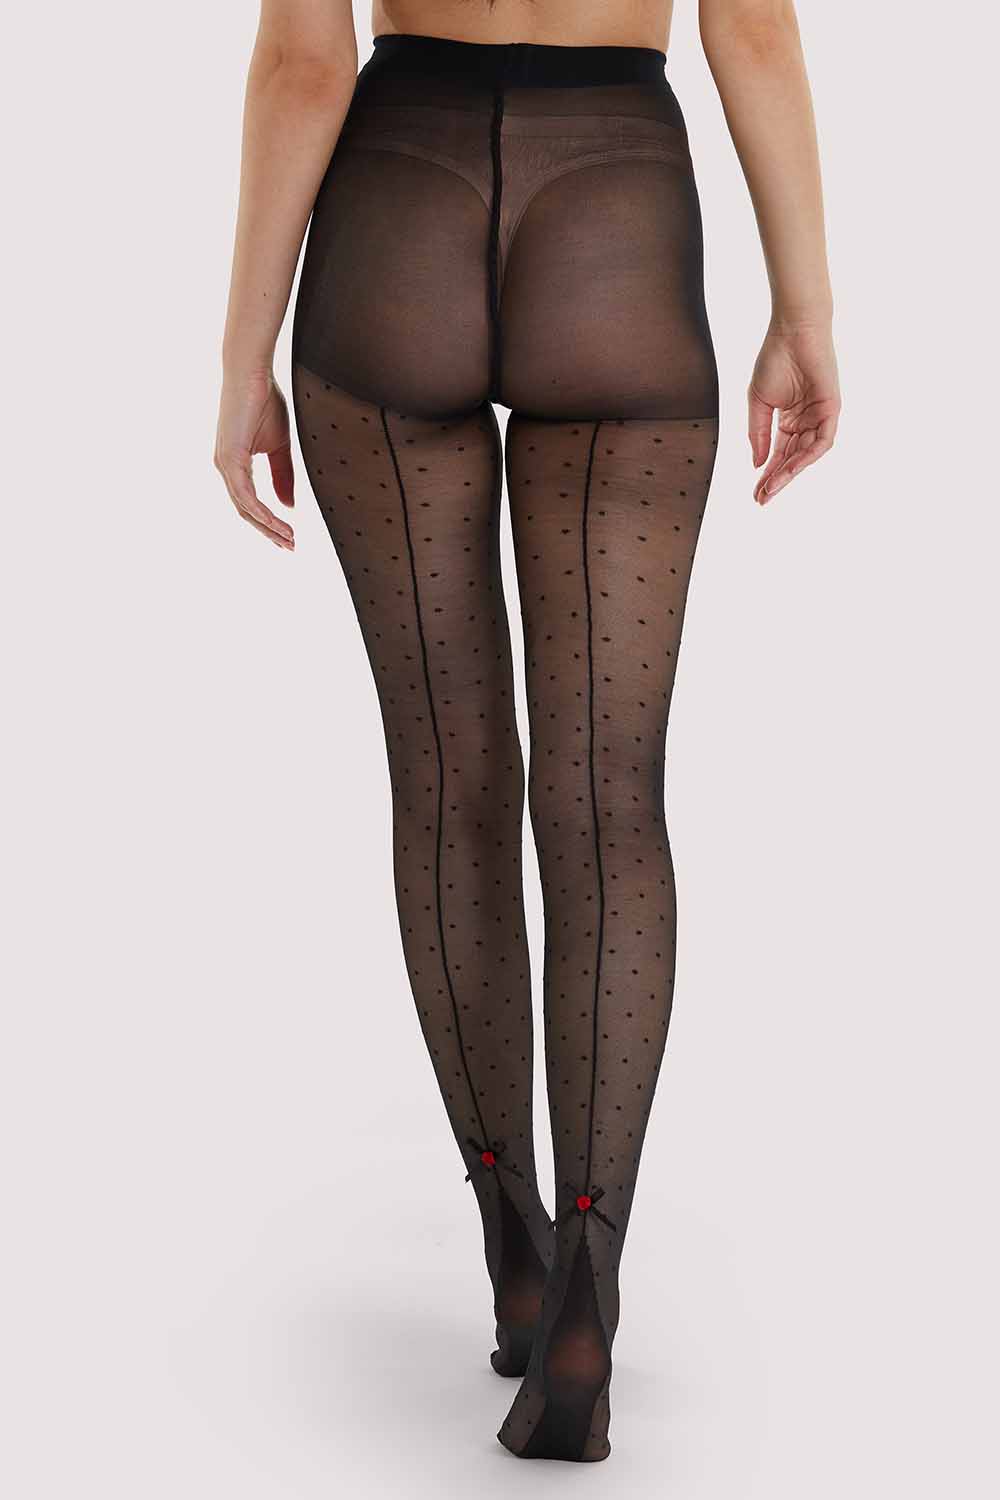 Dotty Seamed Tights With Bow Black AUS 8 - 22